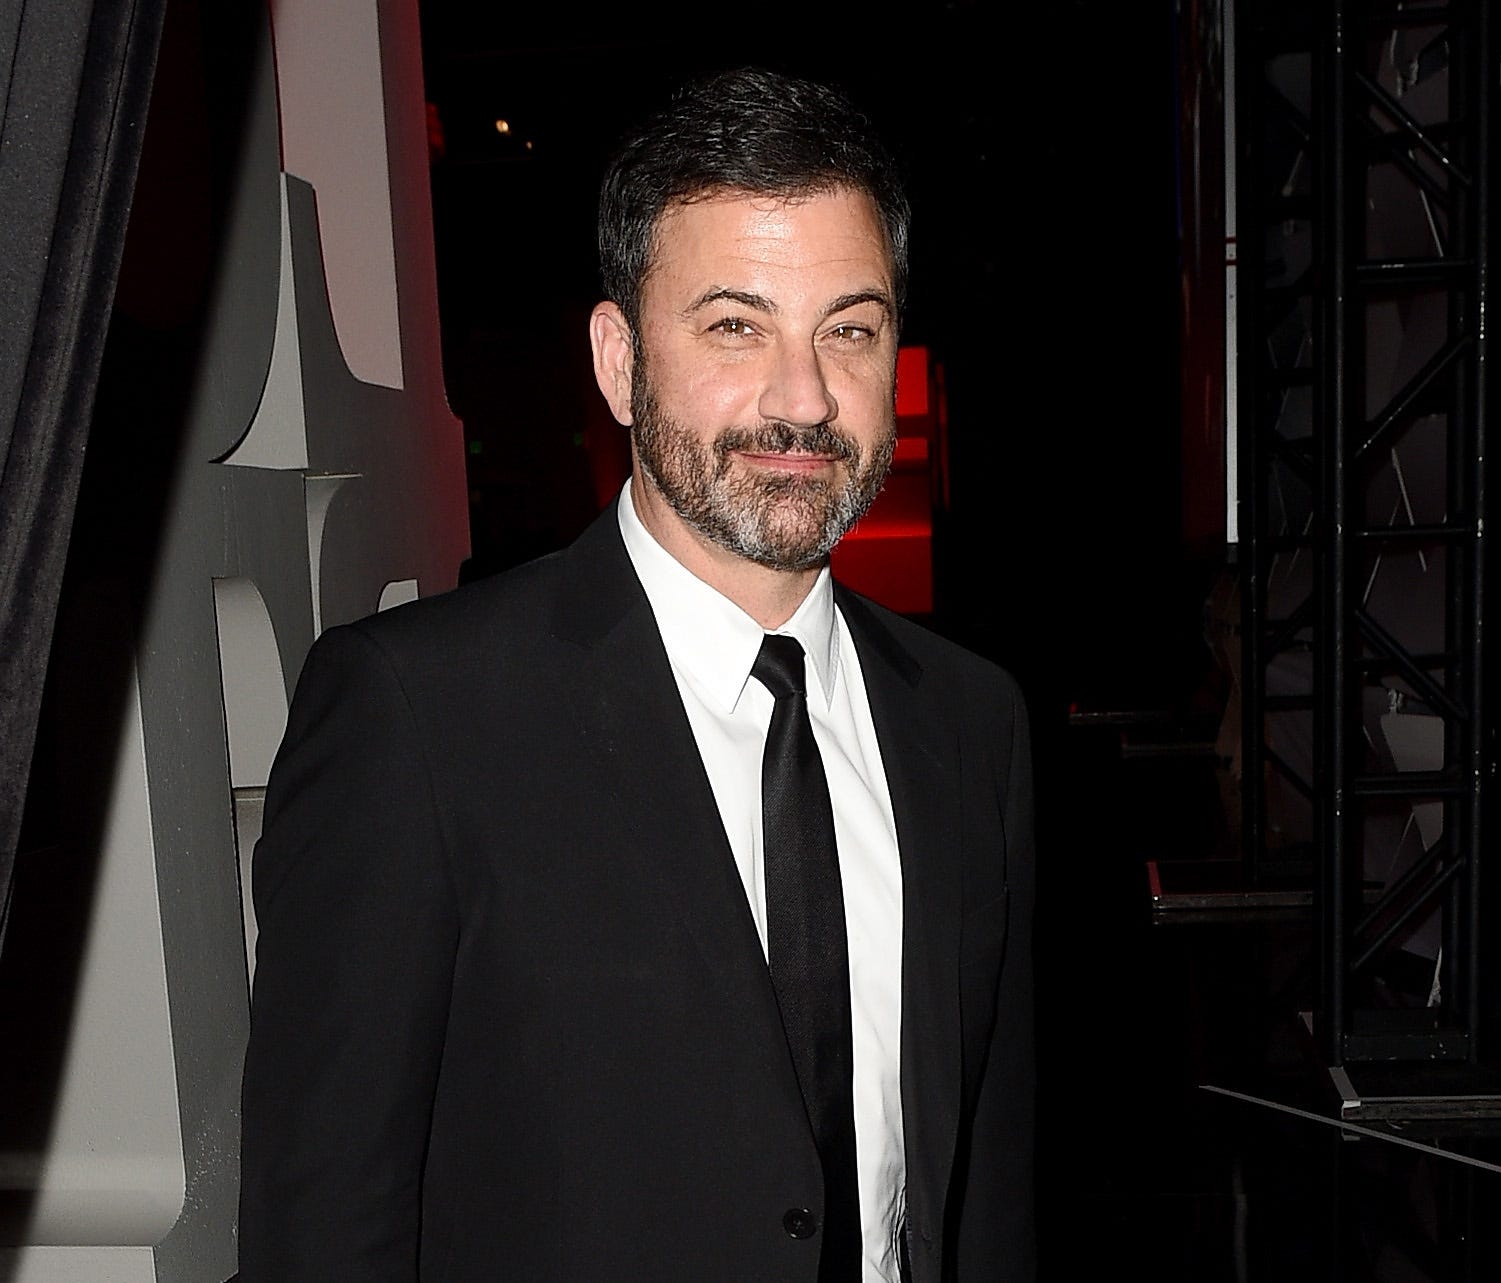 Jimmy Kimmel broke down in tears discussing the Las Vegas shooting on Monday.